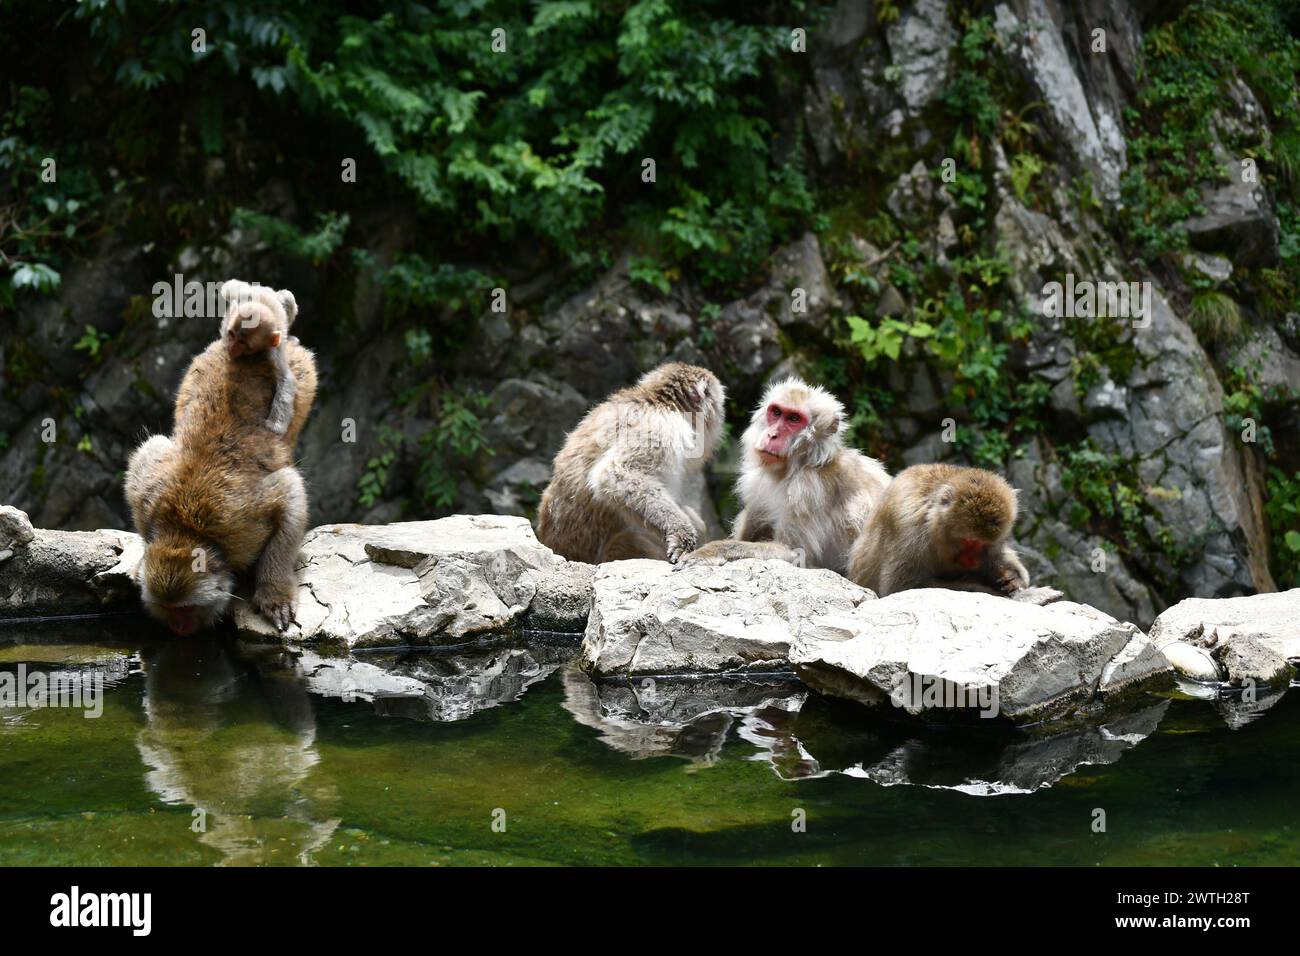 Japanese macaques or snow monkeys in Jigokudani National Park in Nagano Prefecture, bathe in the onsen together with their cubs Stock Photo